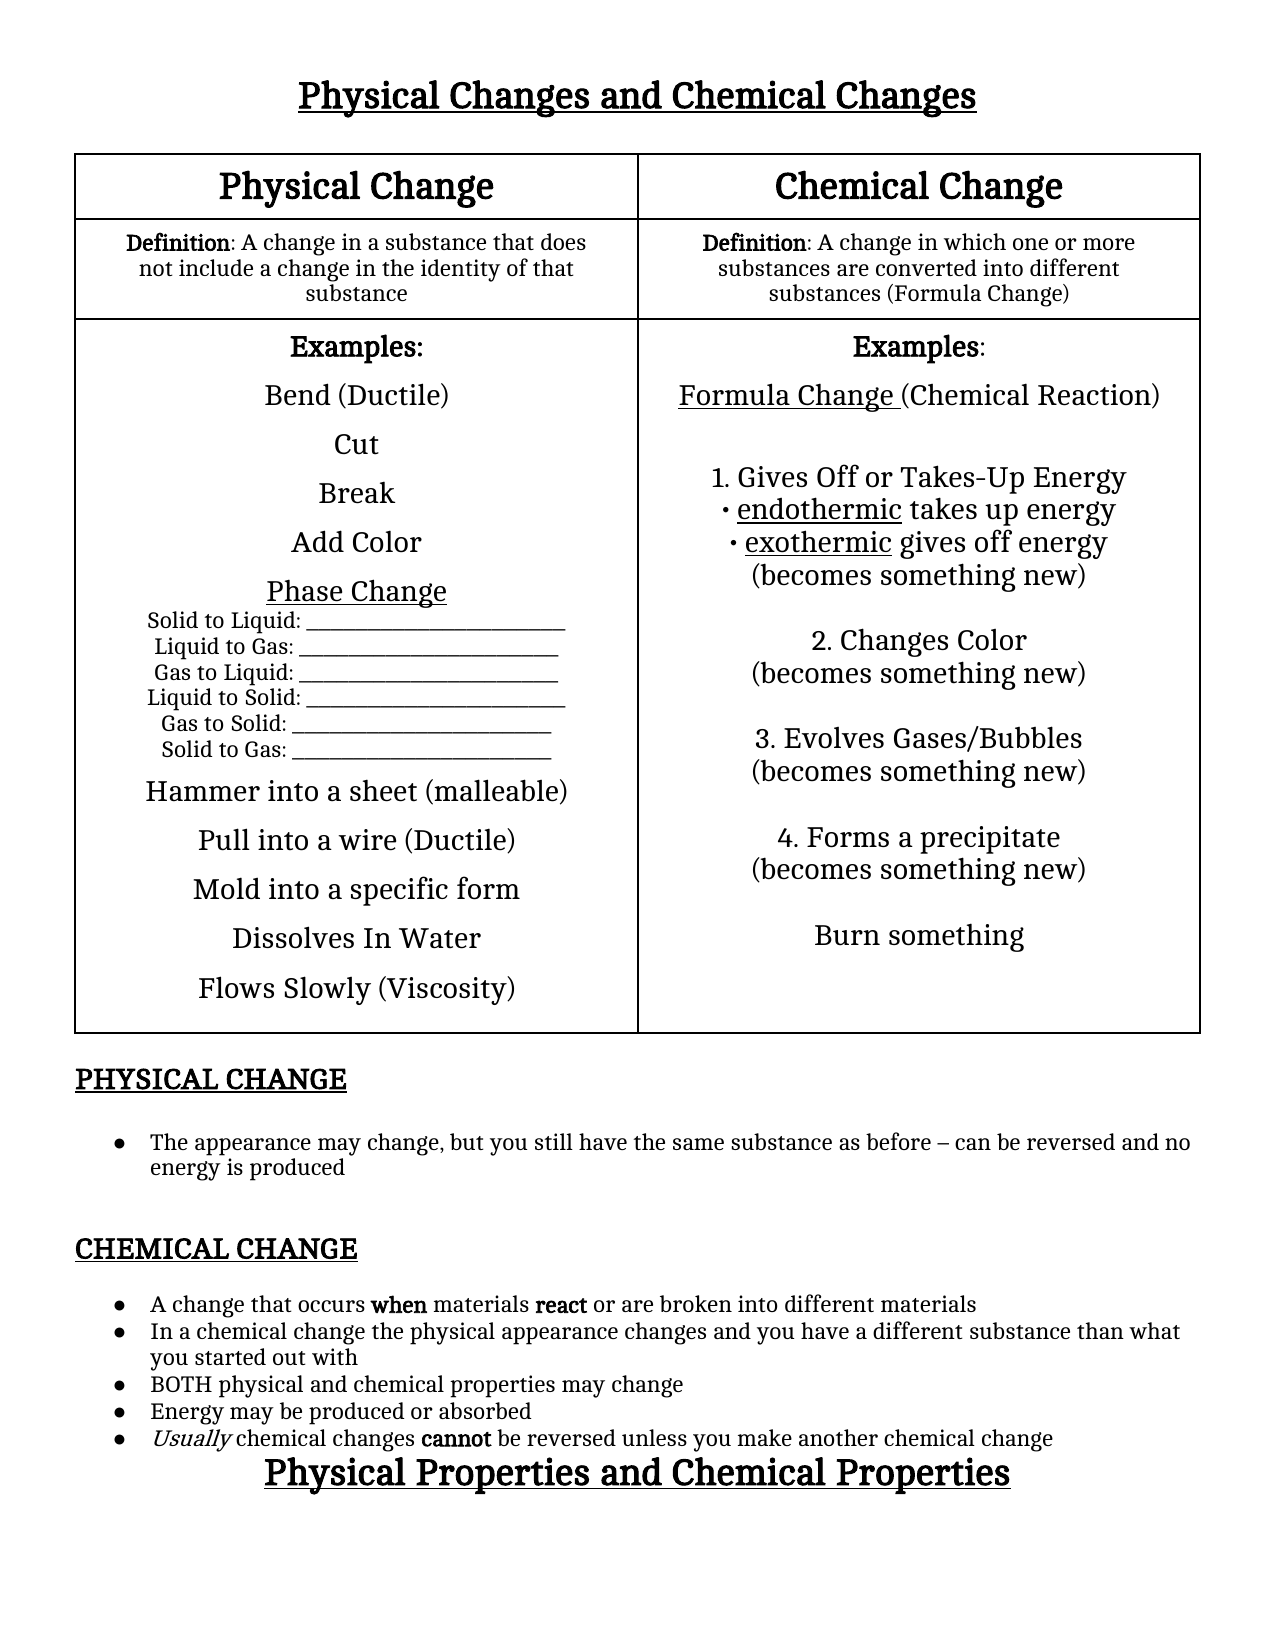 physical-and-chemical-changes-and-properties-of-matter-worksheet